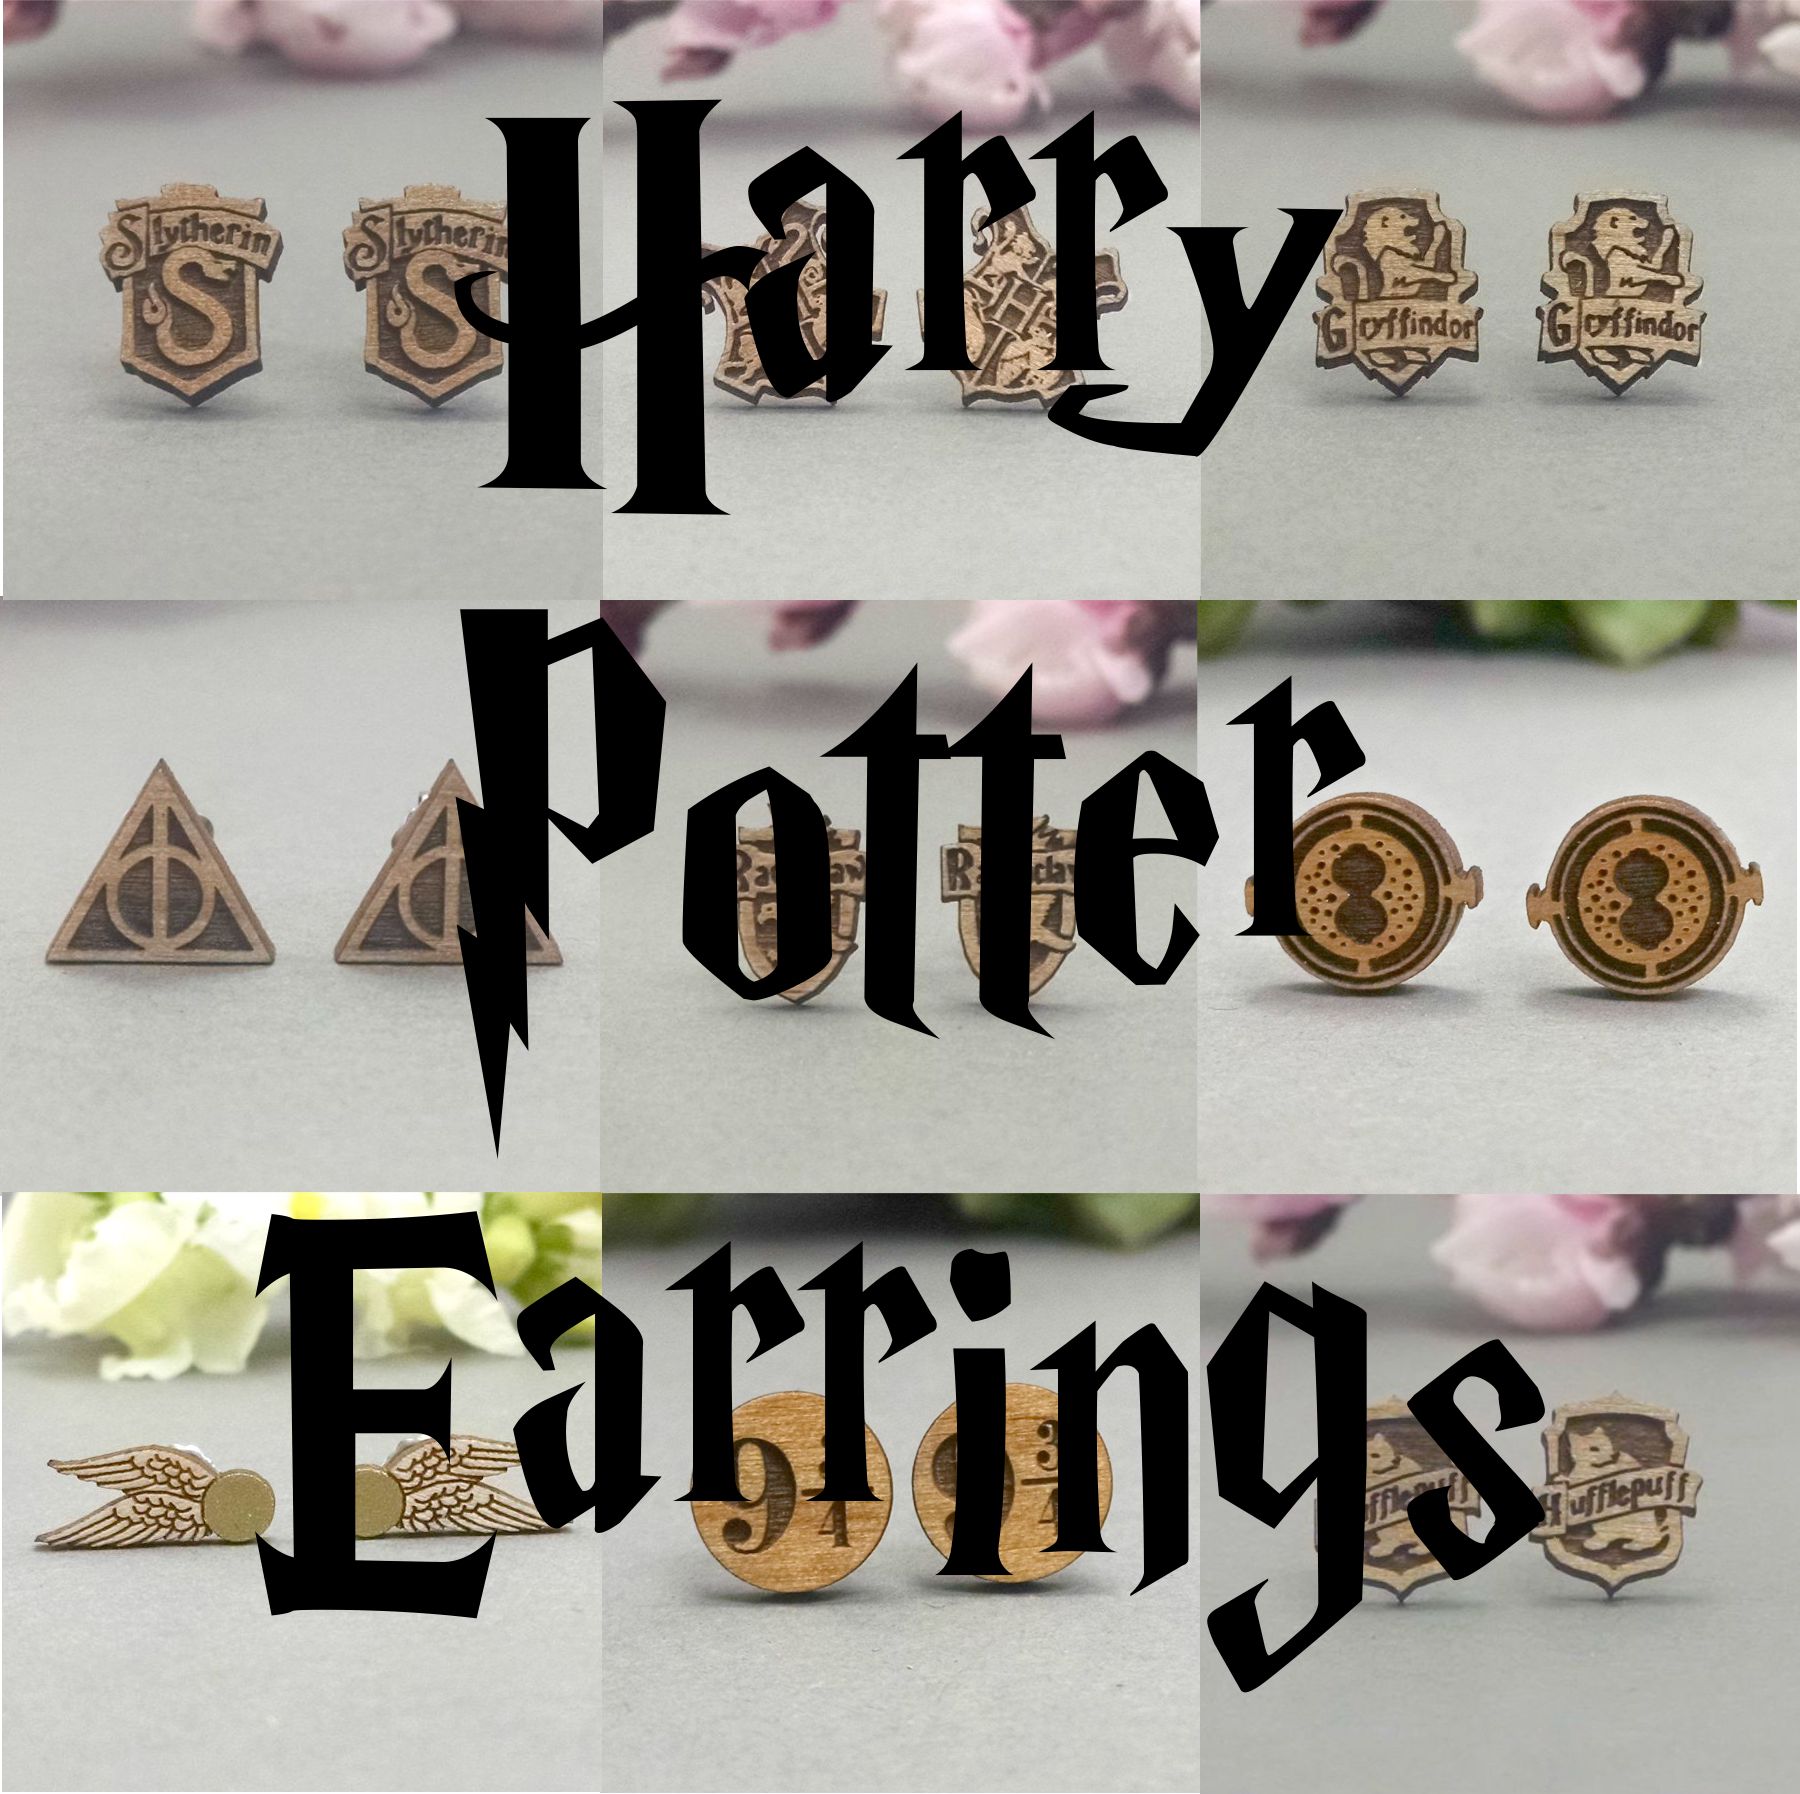 Share 149+ harry potter earrings deathly hallows best